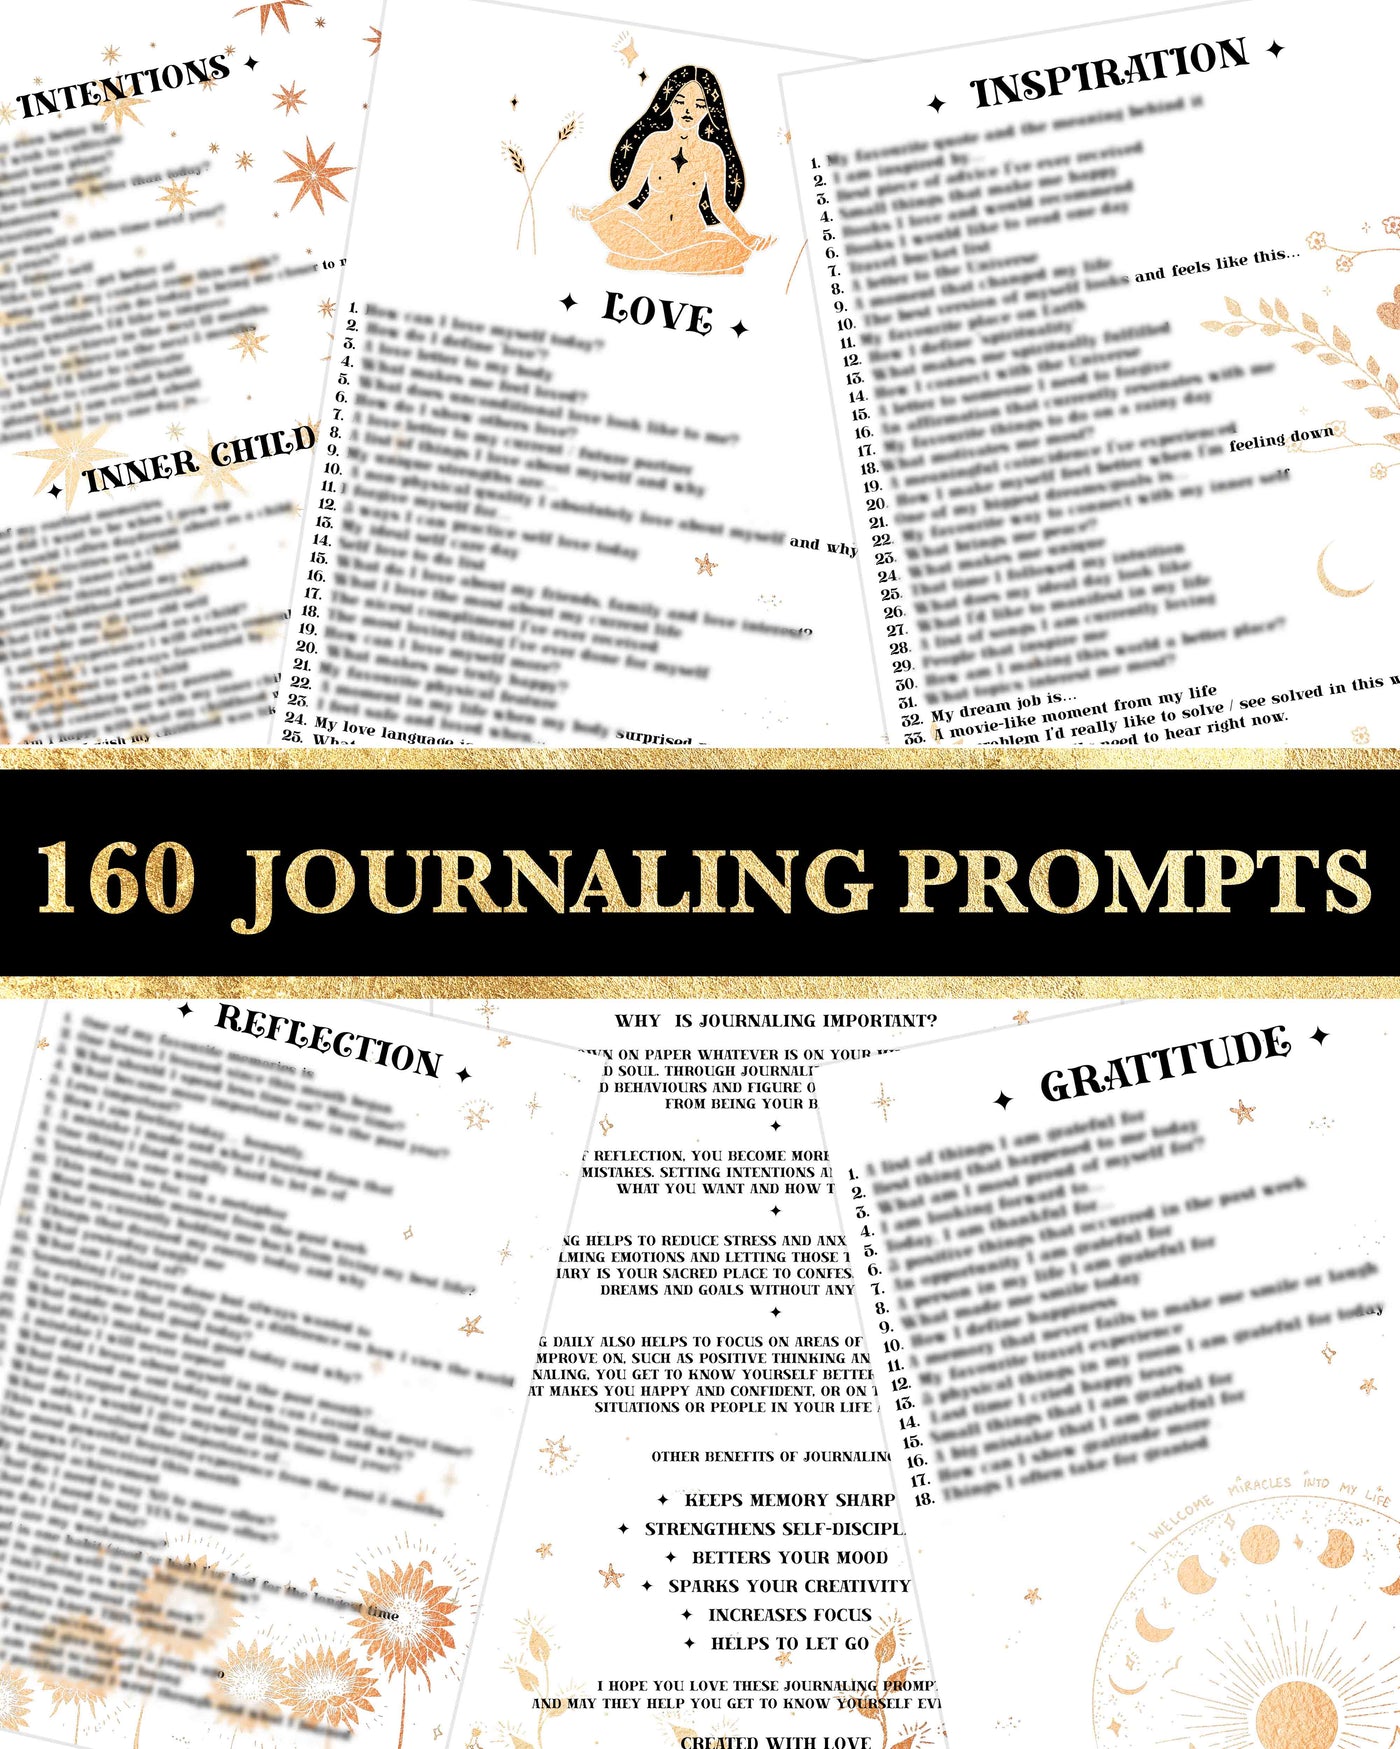 160 Journaling Prompts